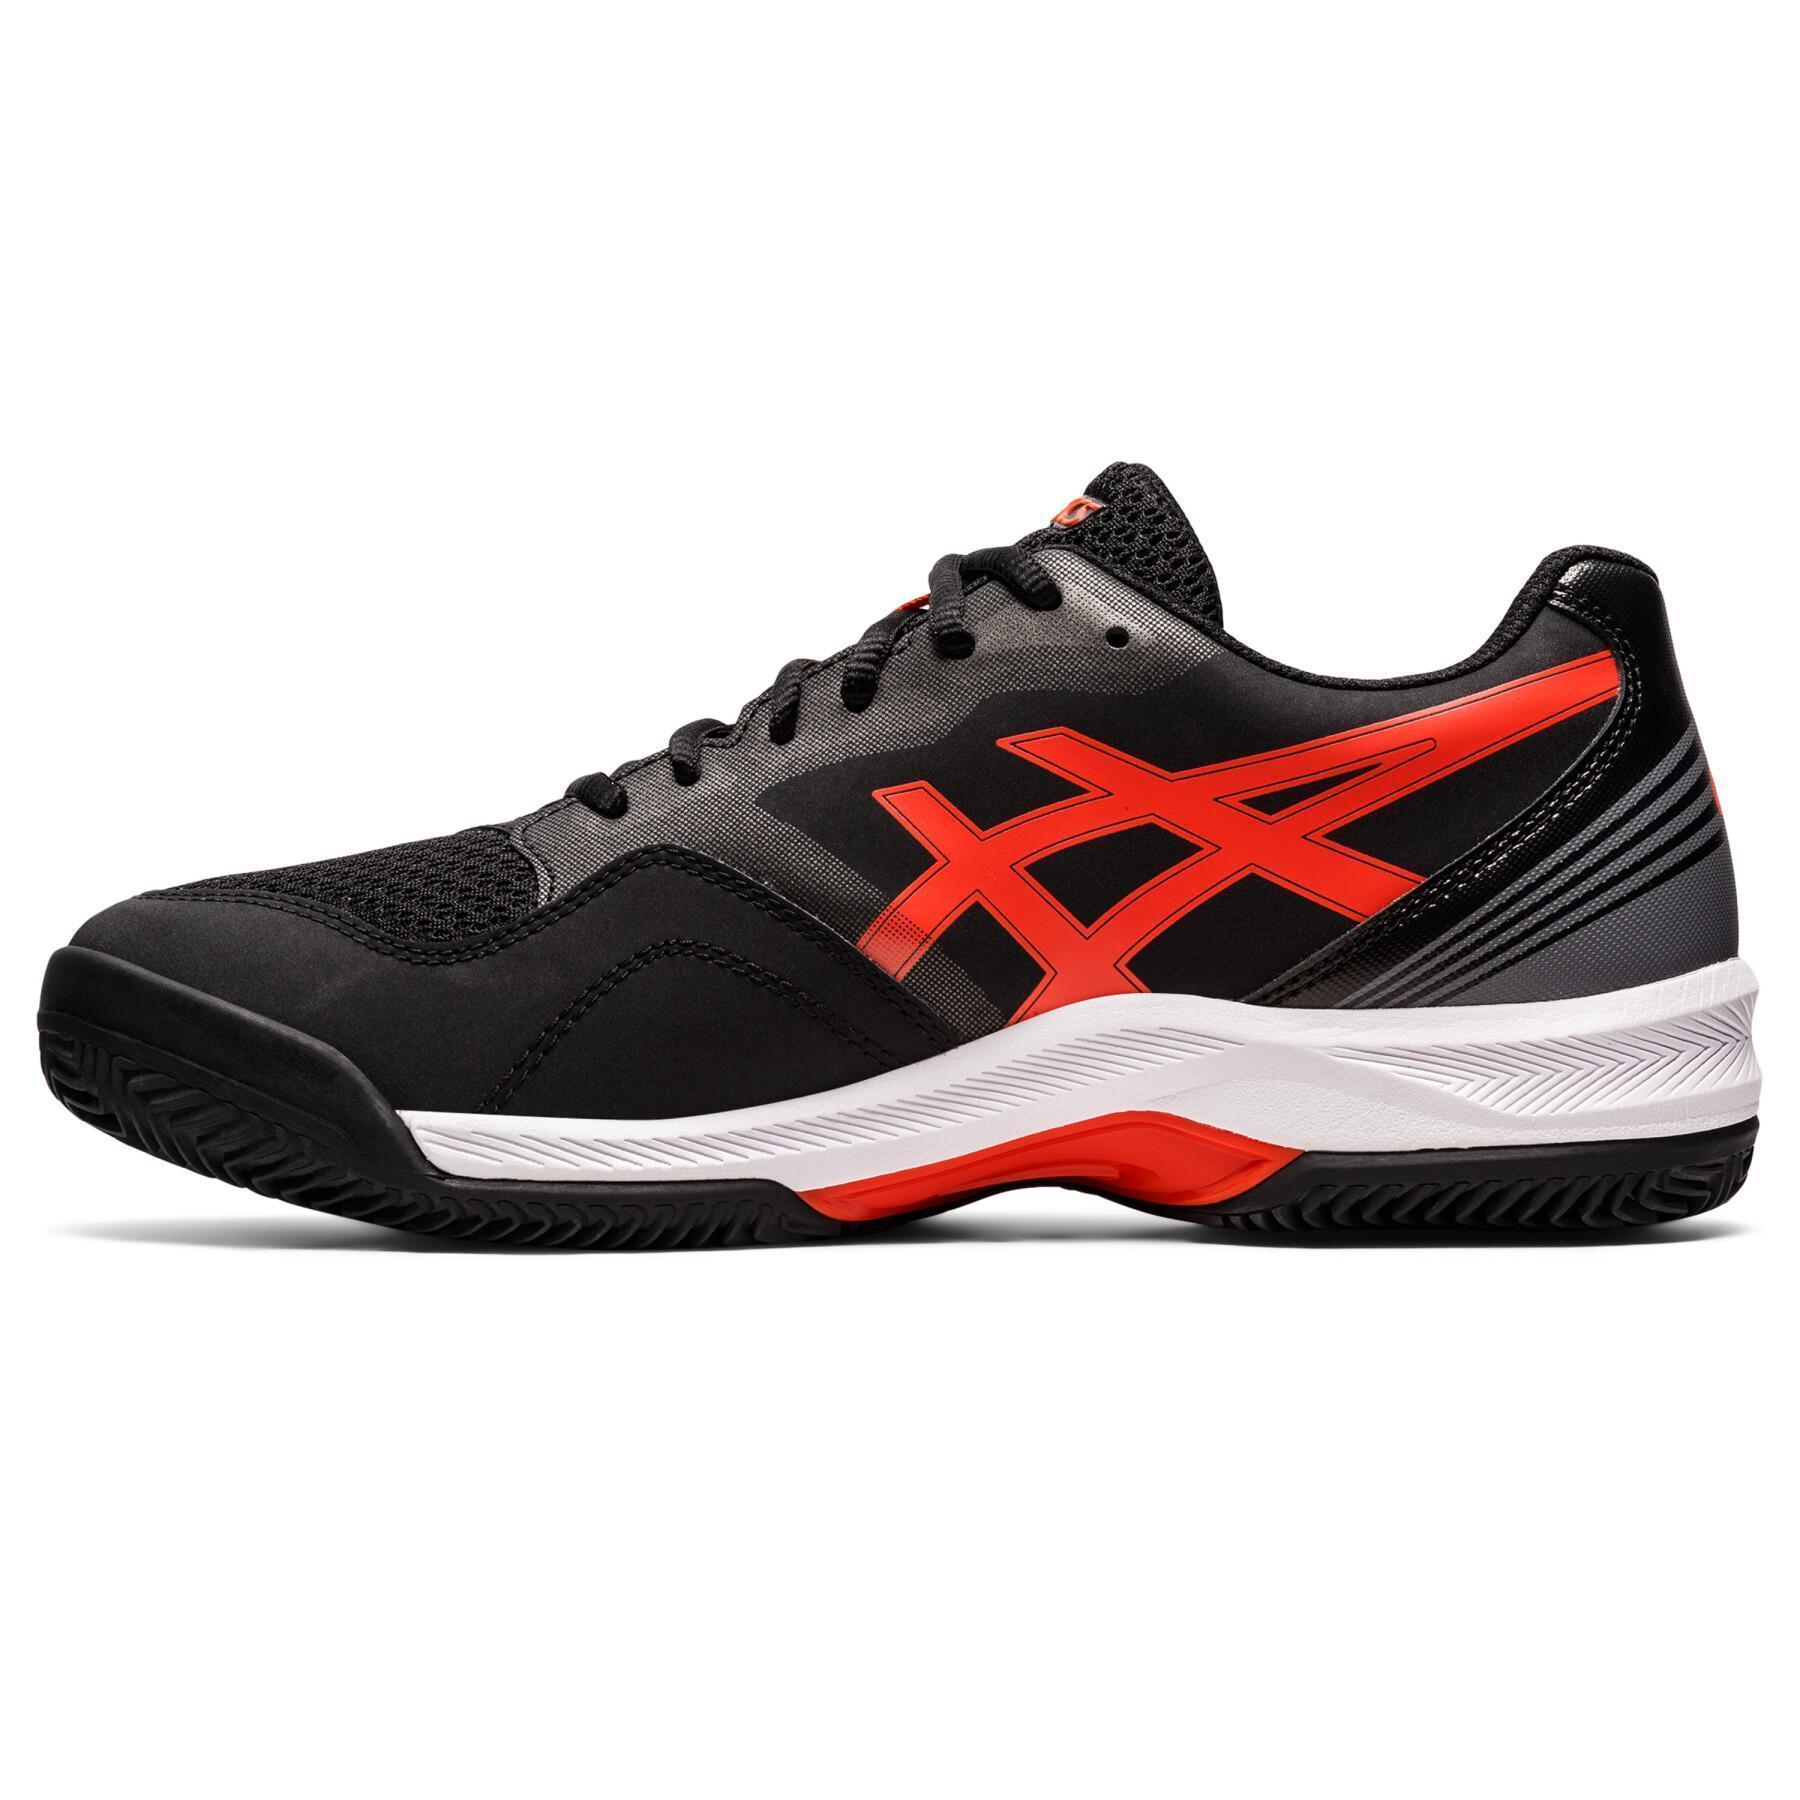 Shoes from padel Asics Gel-Padel Pro 5